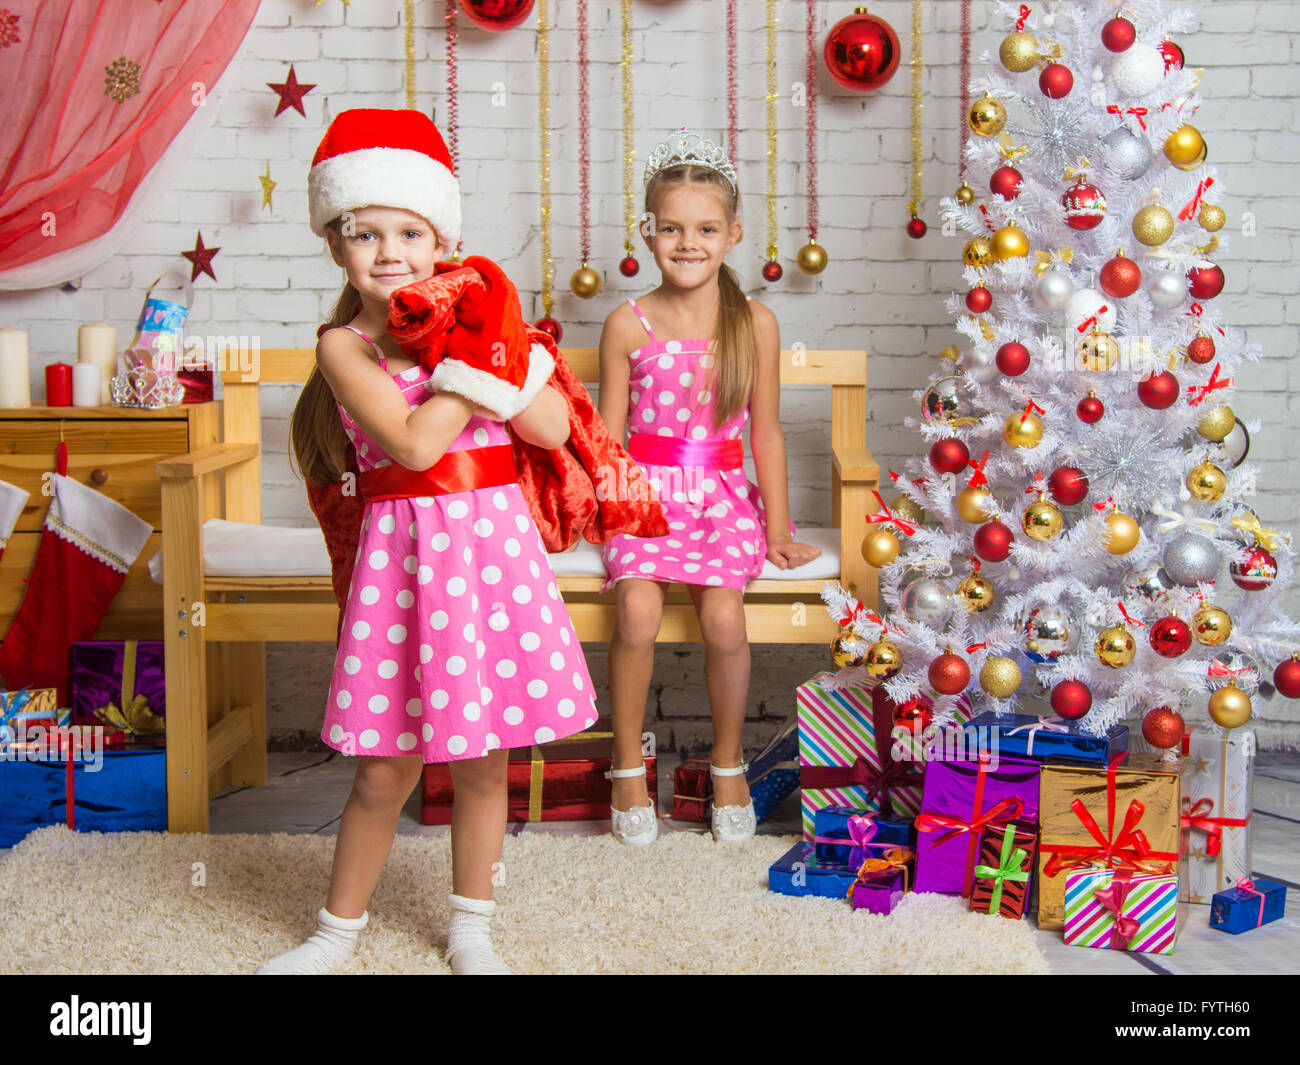 Girl dressed as Santa Claus brought gifts in the bag, another girl rejoices Stock Photo